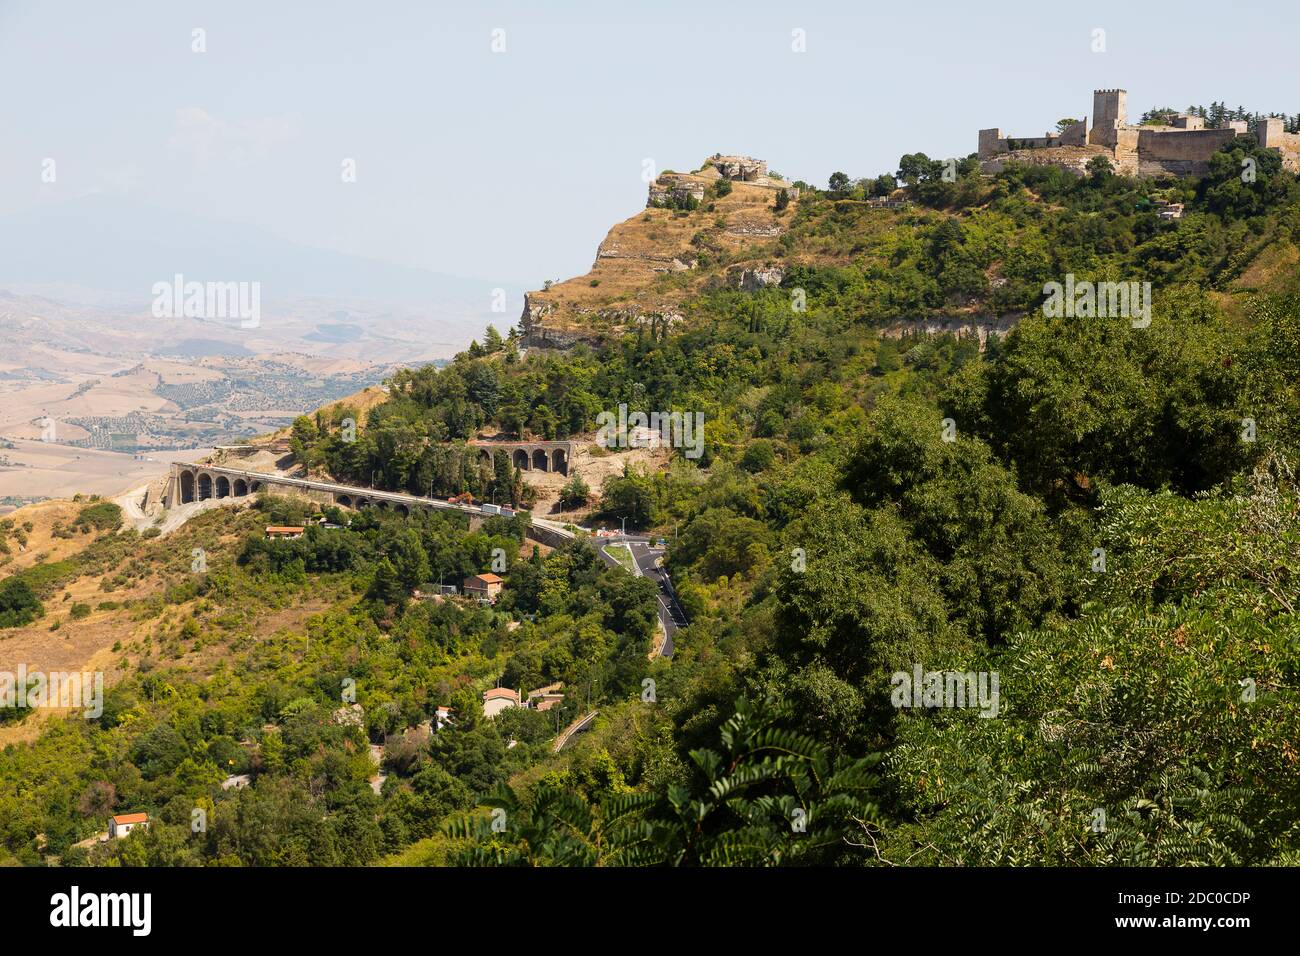 Sicily, Italy. Spectacular view of a hilltop church in the historic town of Enna. Stock Photo